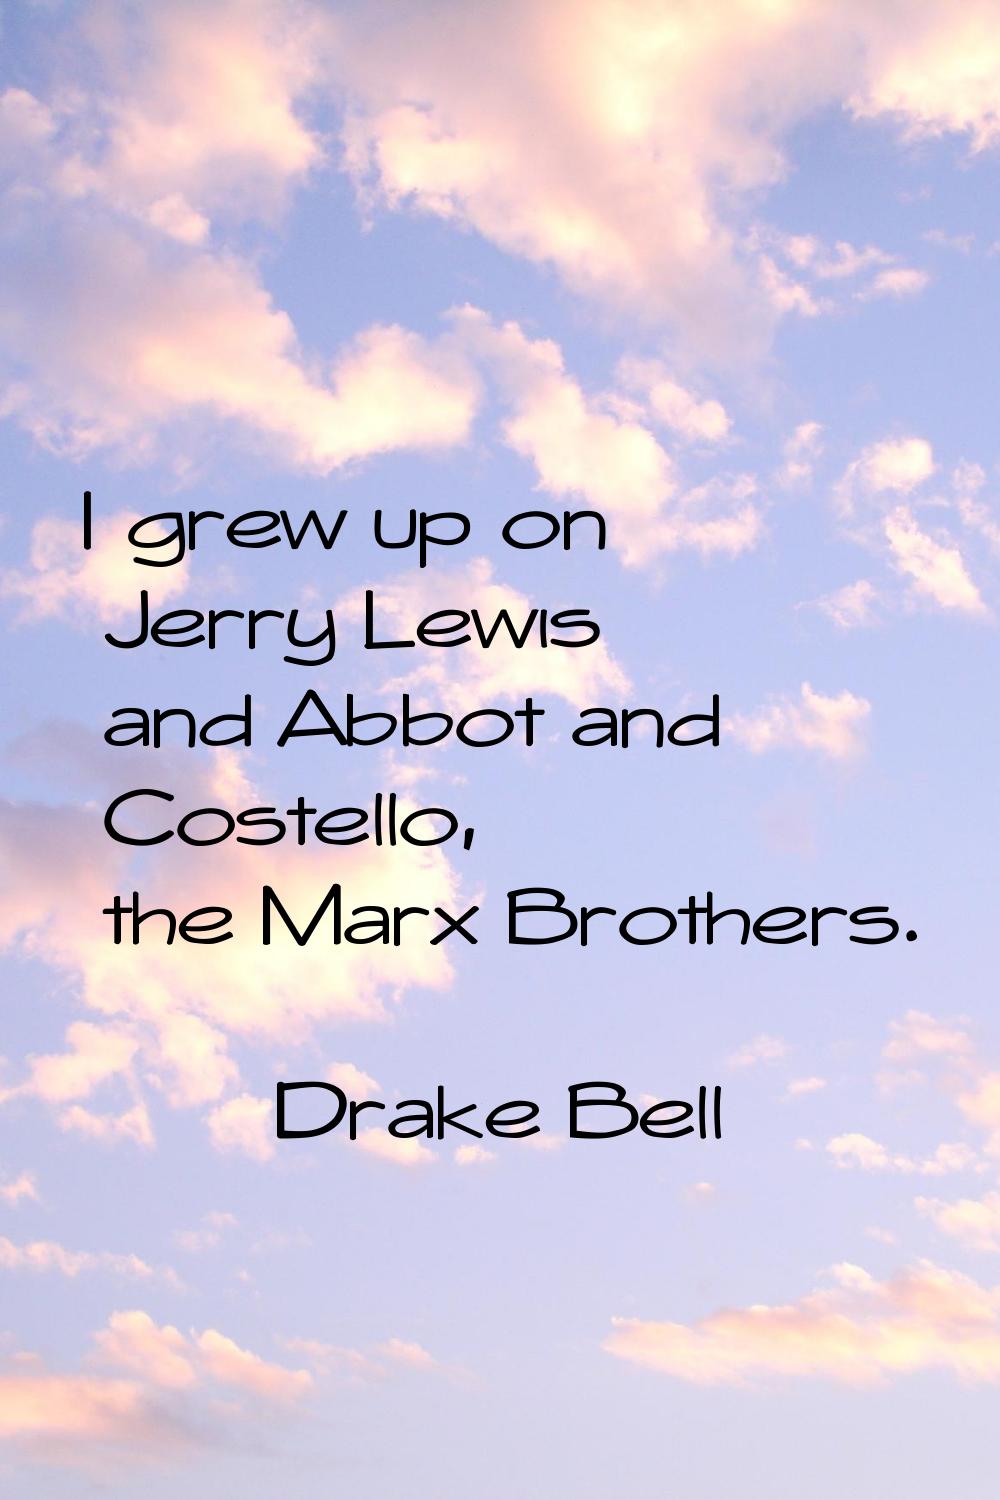 I grew up on Jerry Lewis and Abbot and Costello, the Marx Brothers.